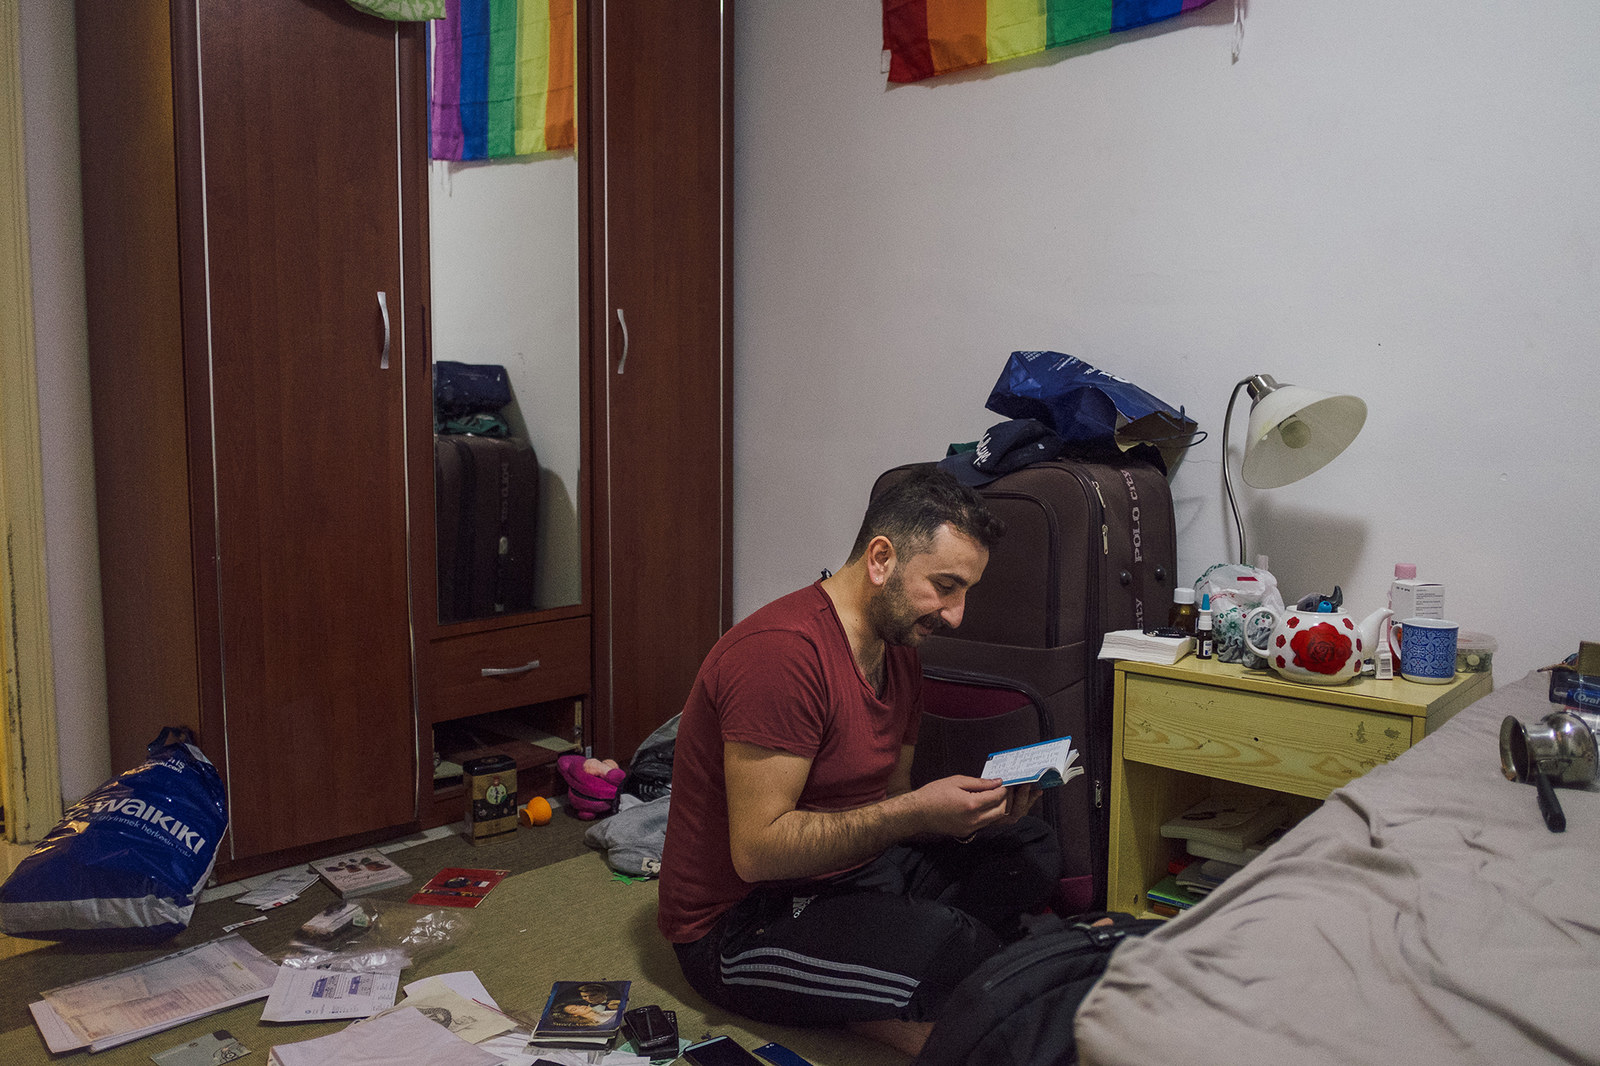 While packing, it's difficult for Nader not to think of what he'll be leaving behind: his job, his friends, and his fiancé.